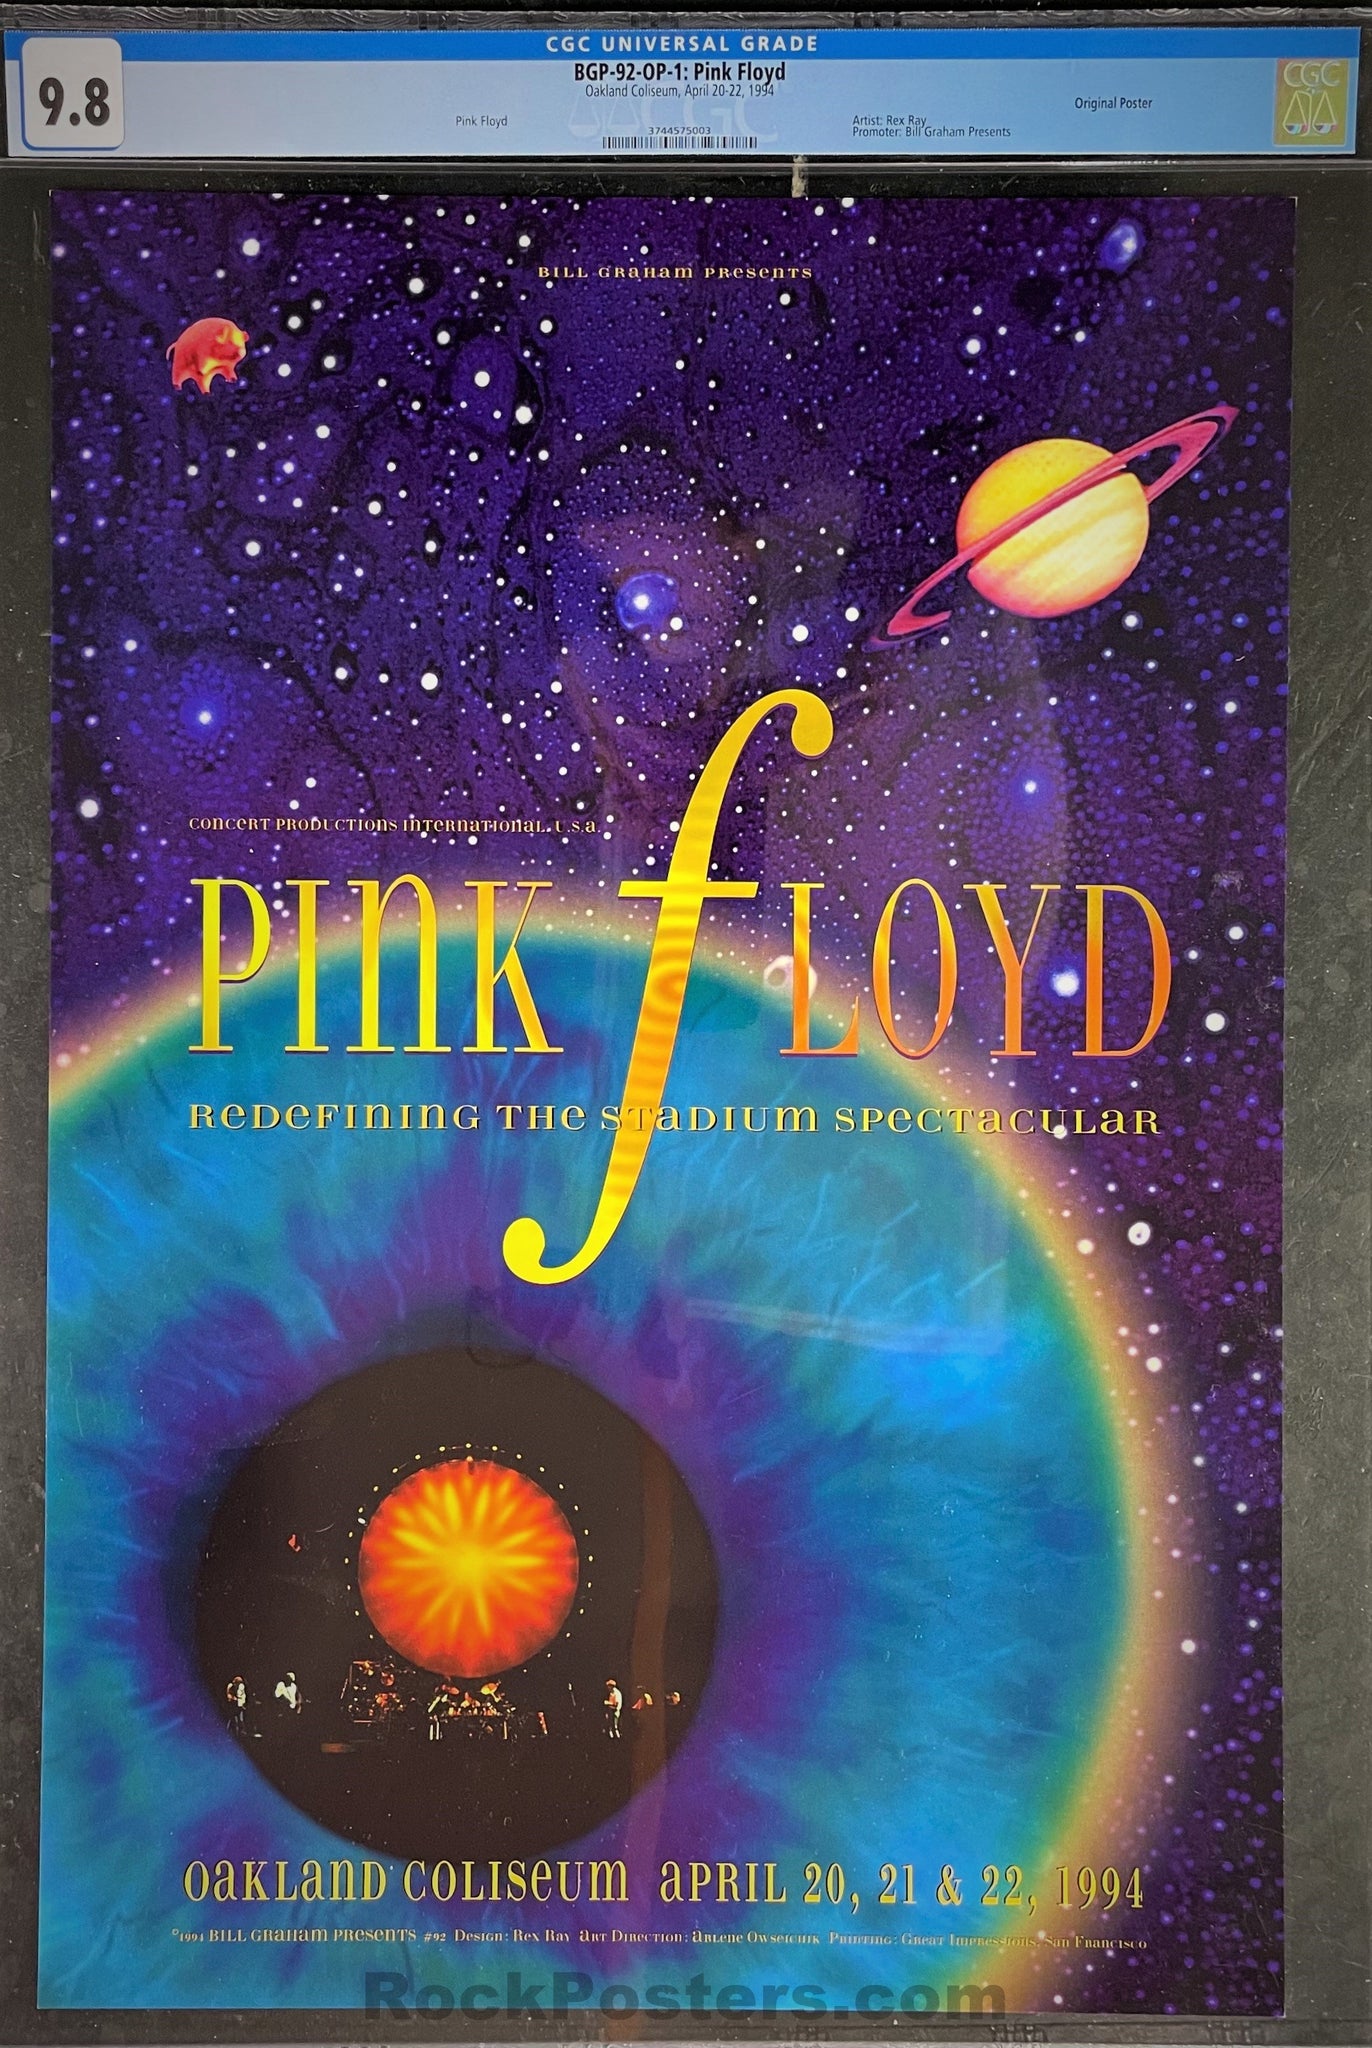 BGP-92 - Pink Floyd - Rex Ray - 1994 Poster - Oakland Coliseum - CGC G – SF  Rock Posters & Collectibles